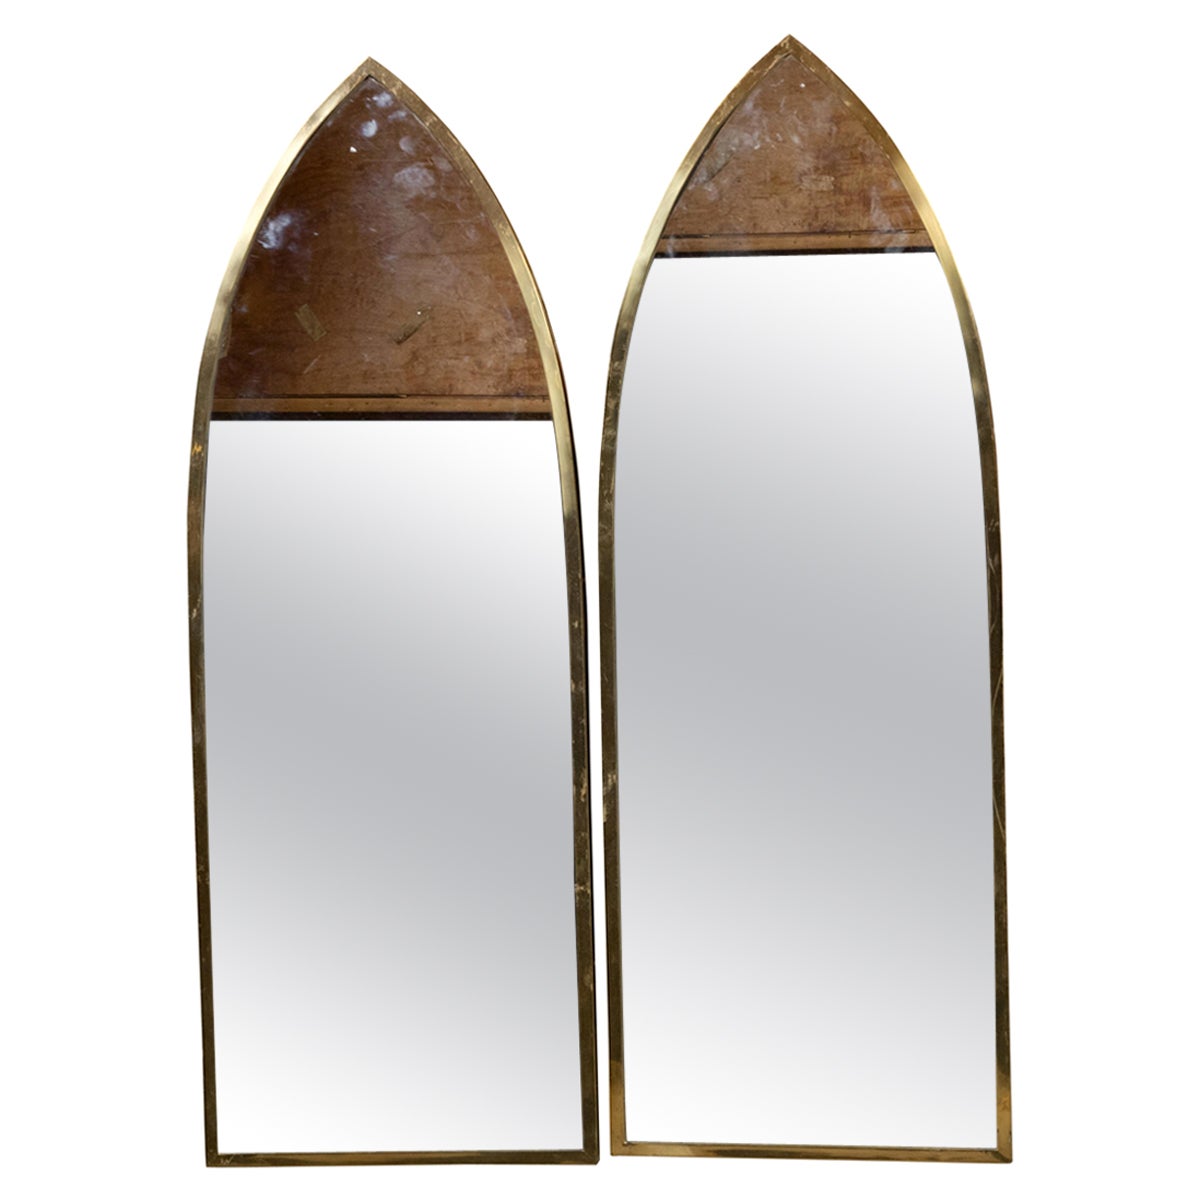 Pair of Midcentury Neo Gothic Style Brass Mirrors with Pointed Arch Silhouettes